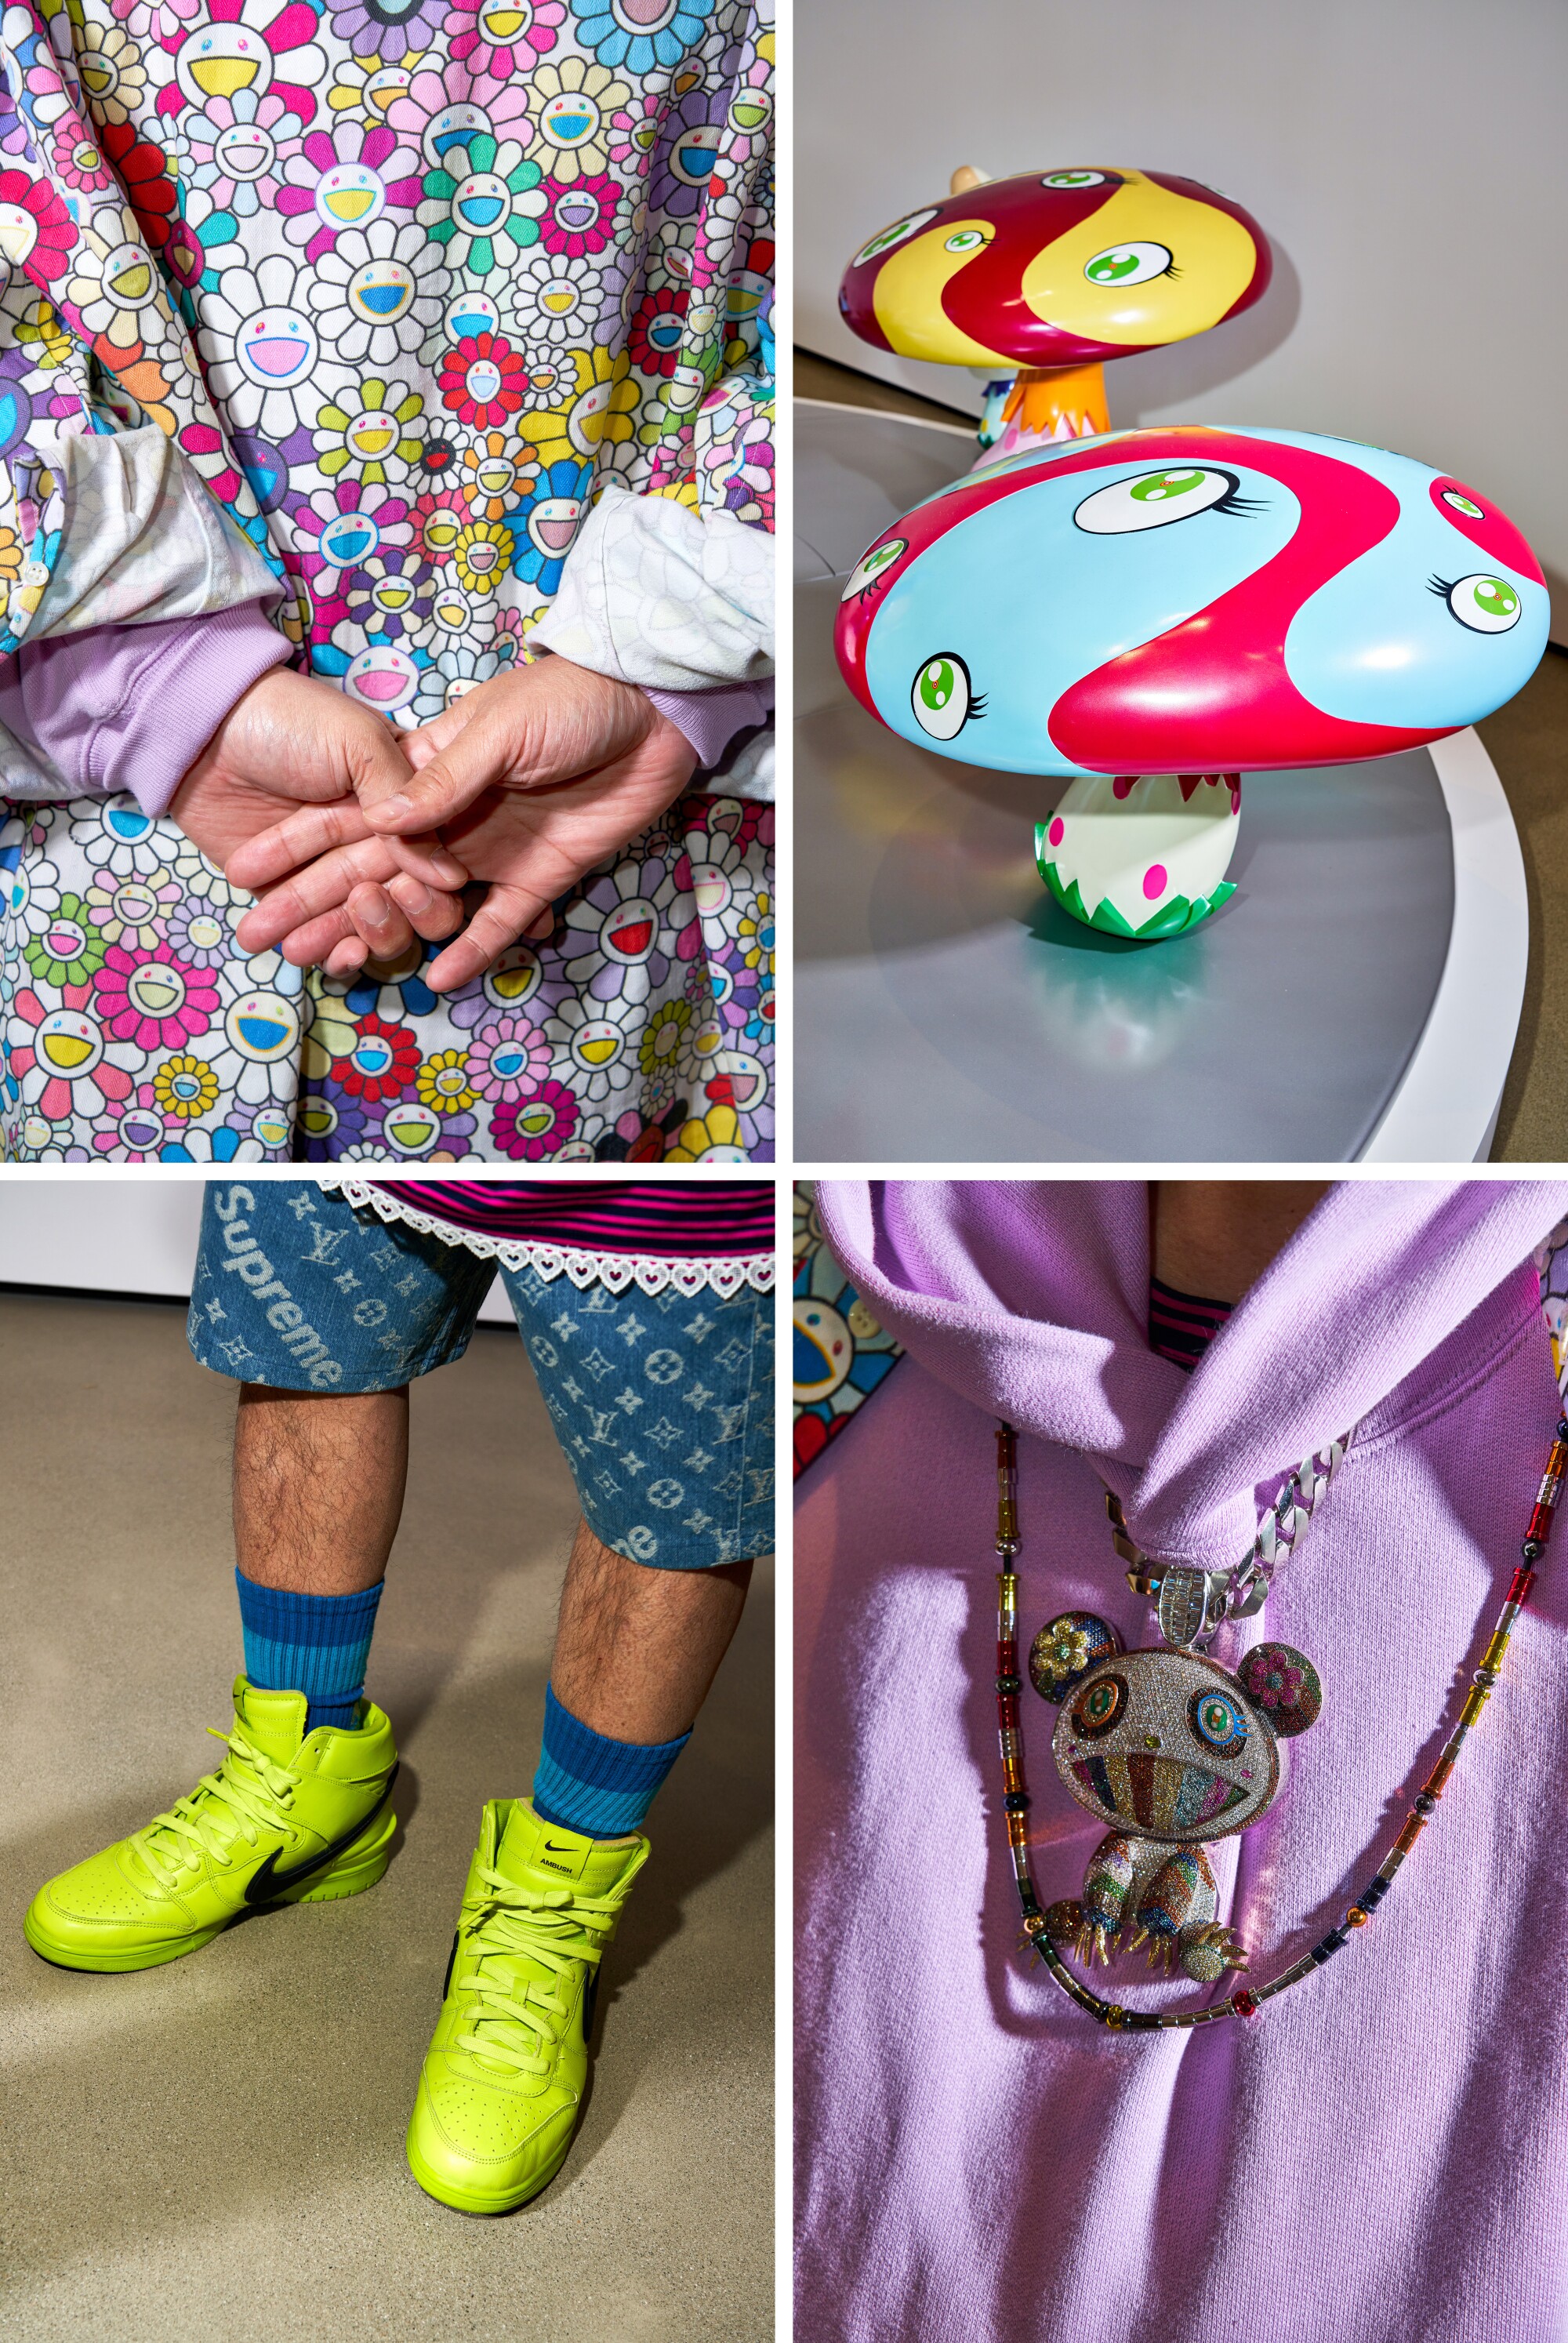 A grid of four photos show details of clothing, shoes and painted 3D art.